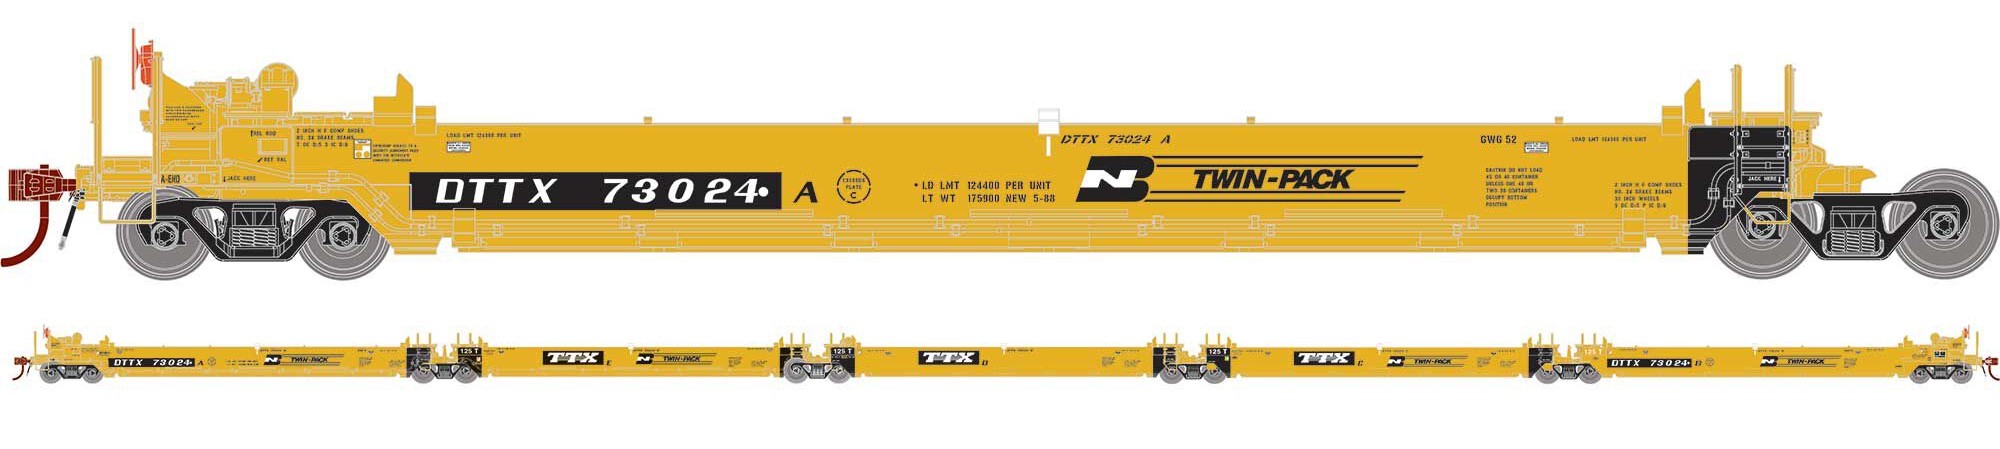 Athearn RTR HO ATH98920 Maxi I Articulated Well Cars 5-unit 'BN Twin-Pack' DTTX #73024